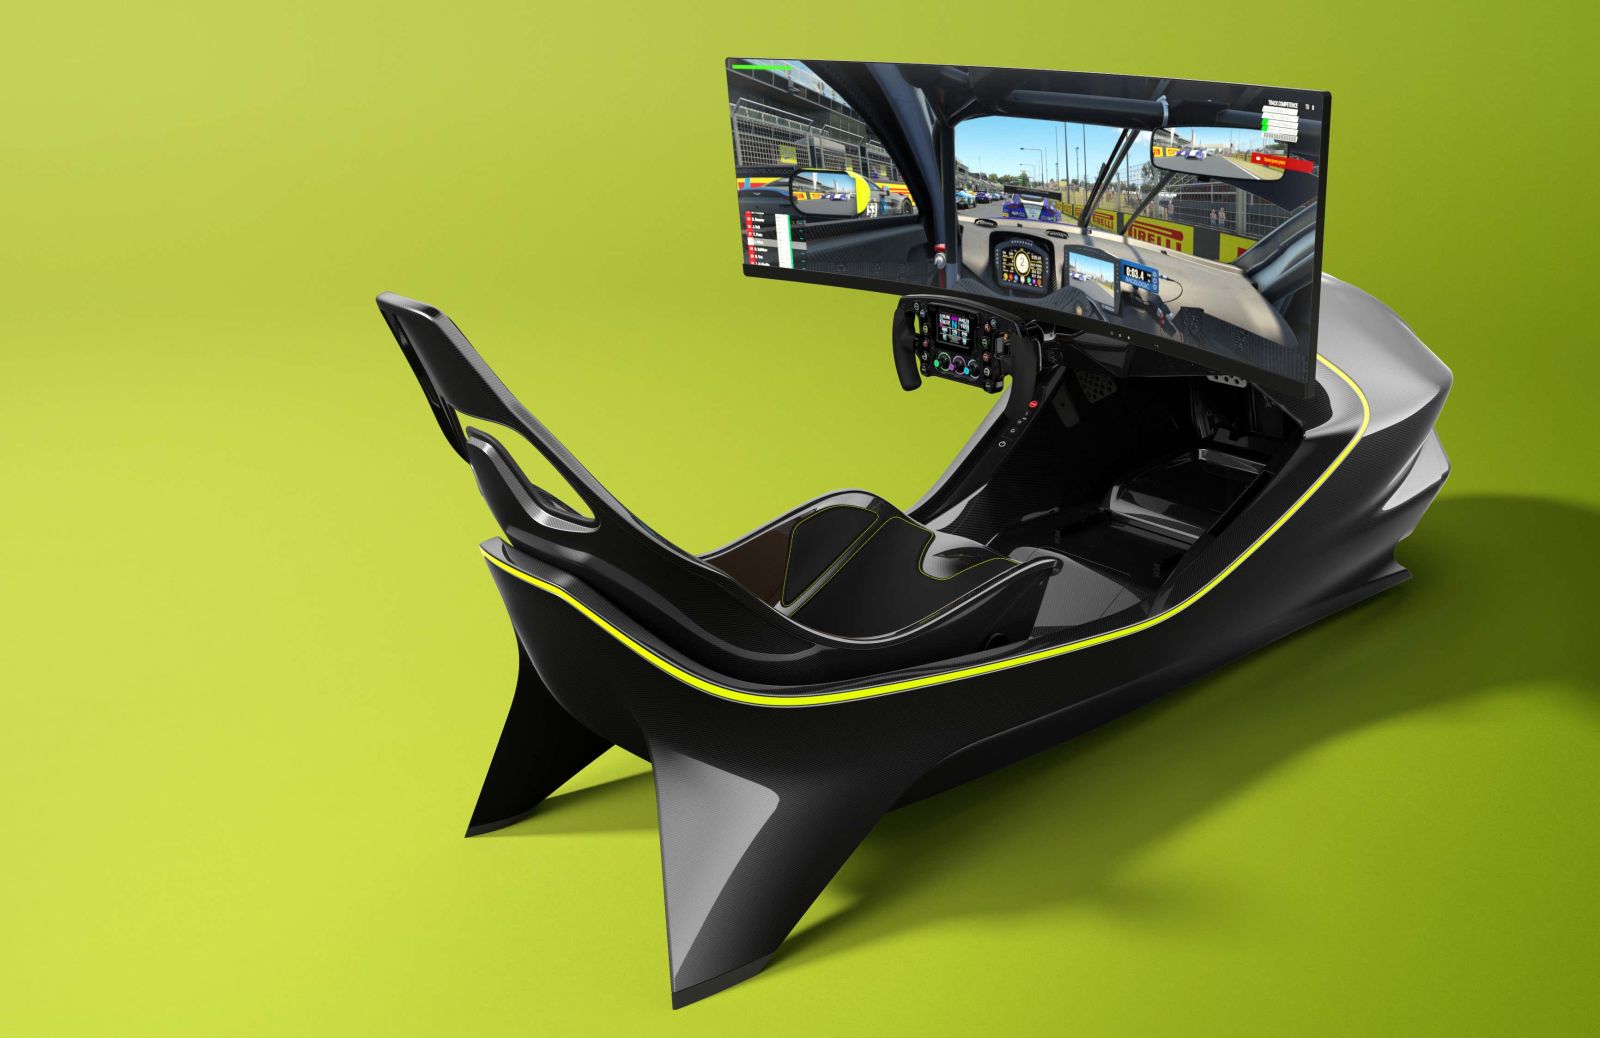 Illustration for article titled When the ultra rich have $74k to blow on a racing simulator.